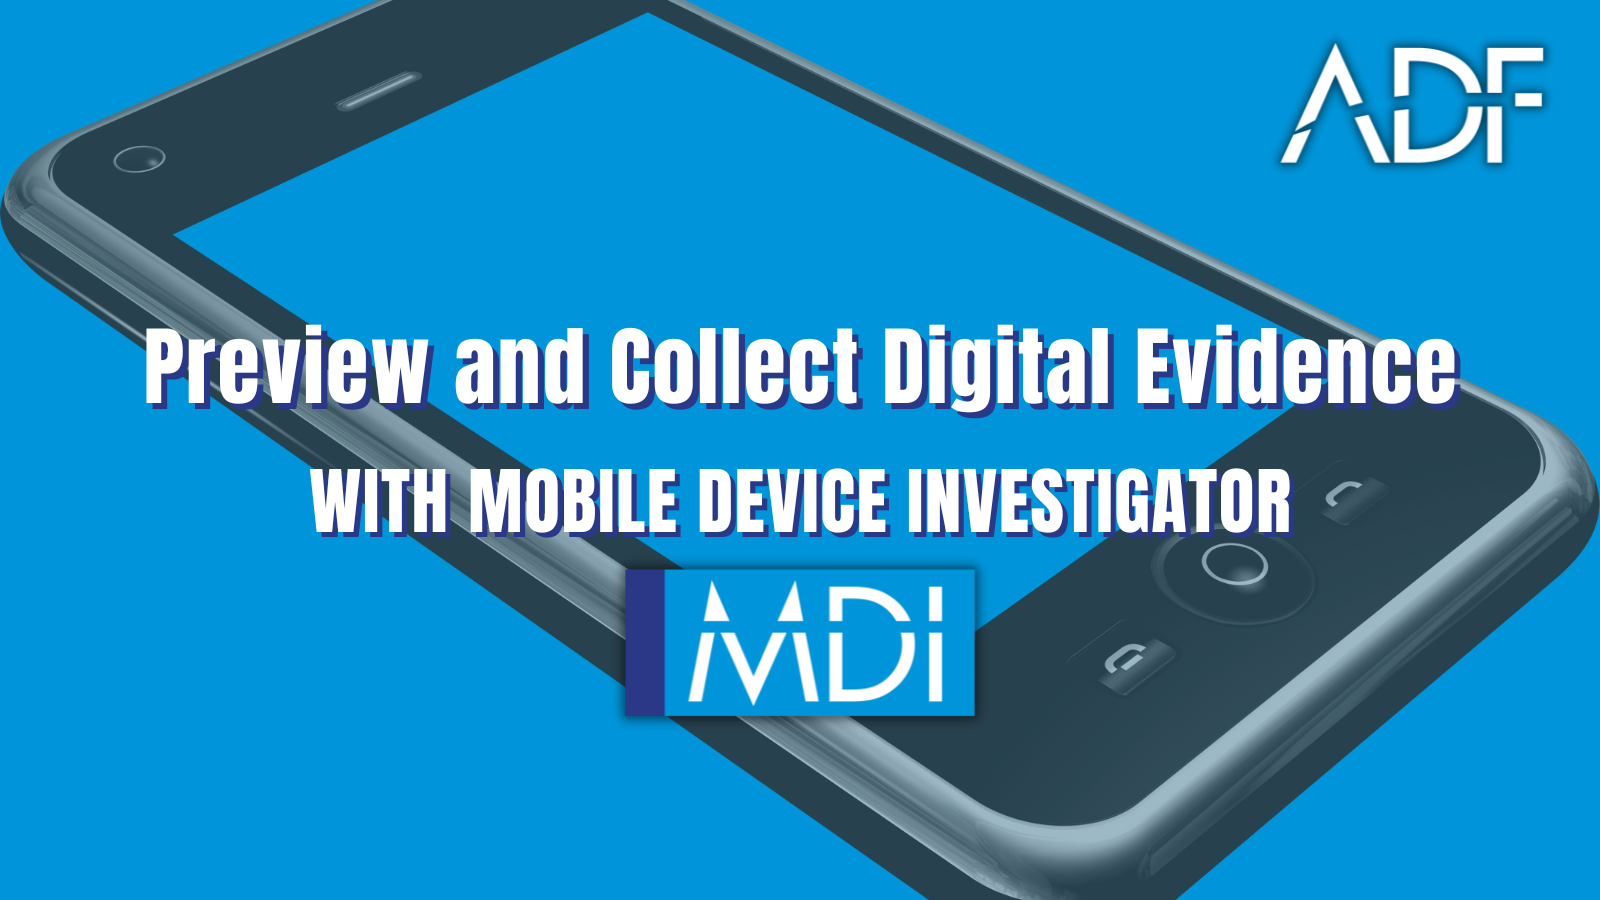 Preview and Collect Digital Evidence with Mobile Device Investigator